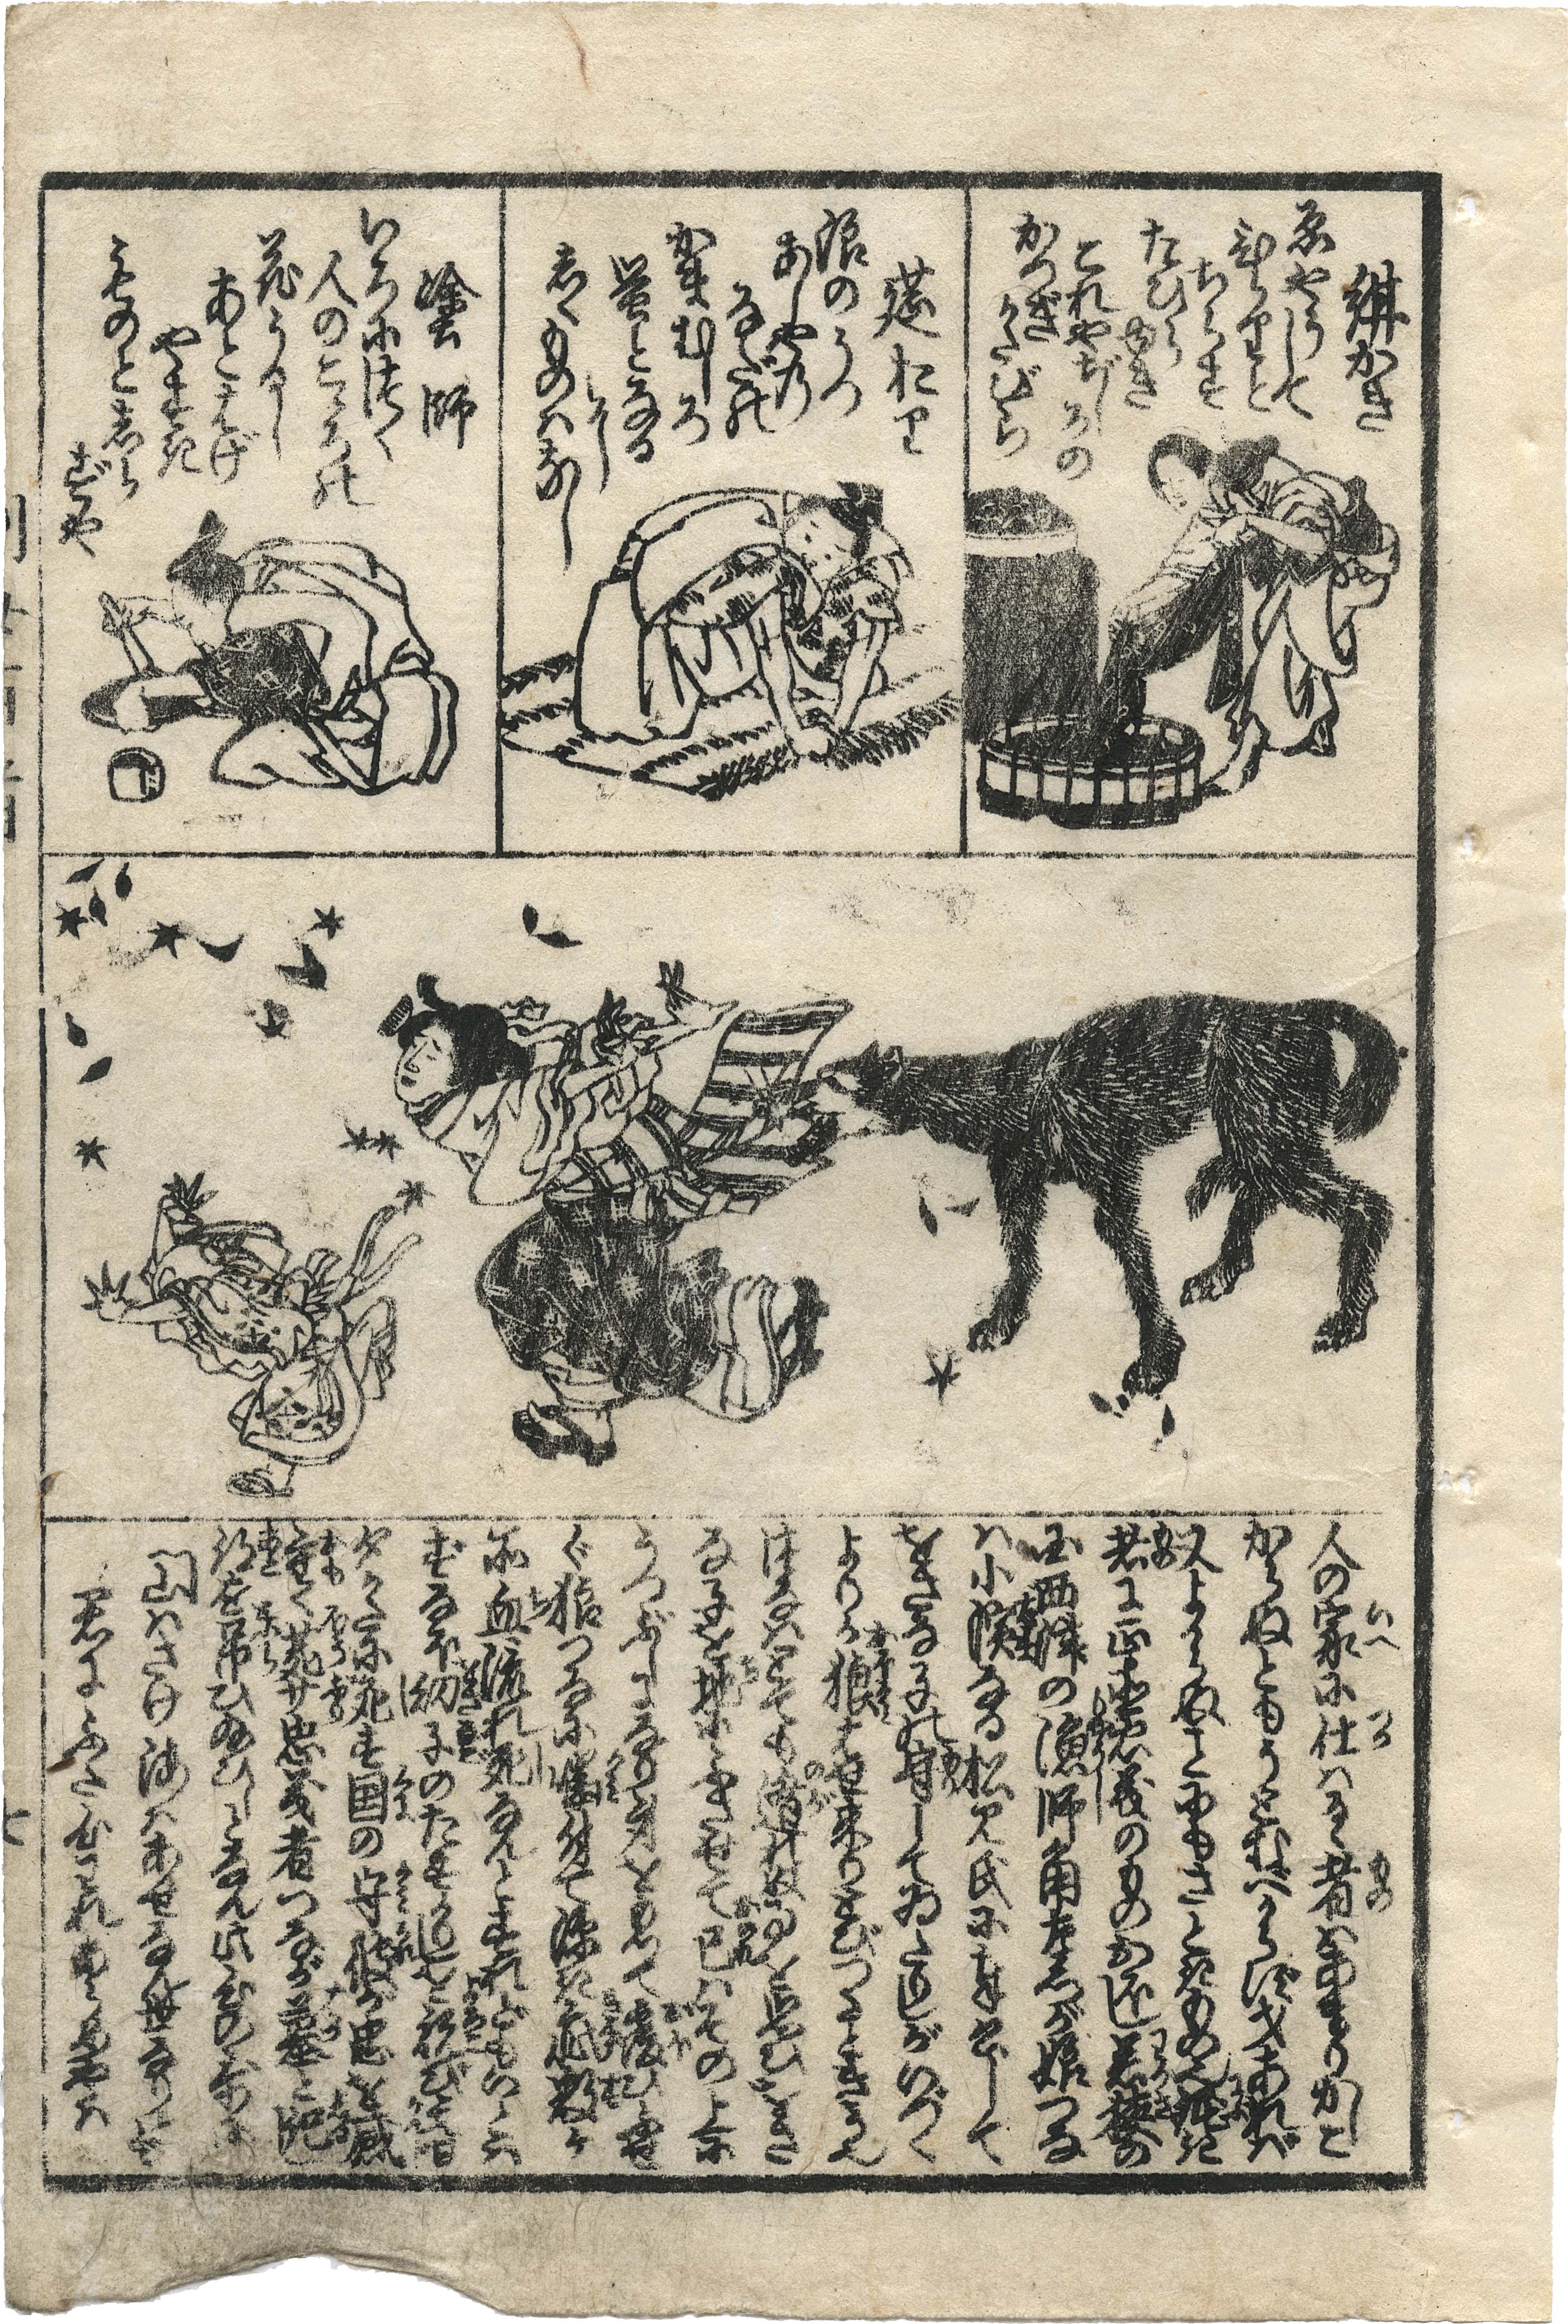 Reminder: No known copyright restrictions. Please credit UBC Library as the image source. For more information see http://digitalcollections.library.ubc.ca/cdm/about Date: K_ka 4 [1847] Creator: Ryokutei Senryu_ shu_ ; Katsushika Manji R_jin, Ichiyo_sai Toyokuni ga Access Identifier: Mostow_006 Source: Original Format: Professor Joshua Mostow Private Collection. One Hundred Poets (Hyakunin isshu) Collection. Permanent URL: http://digitalcollections.library.ubc.ca/cdm/ref/collection/hundred/id/4456